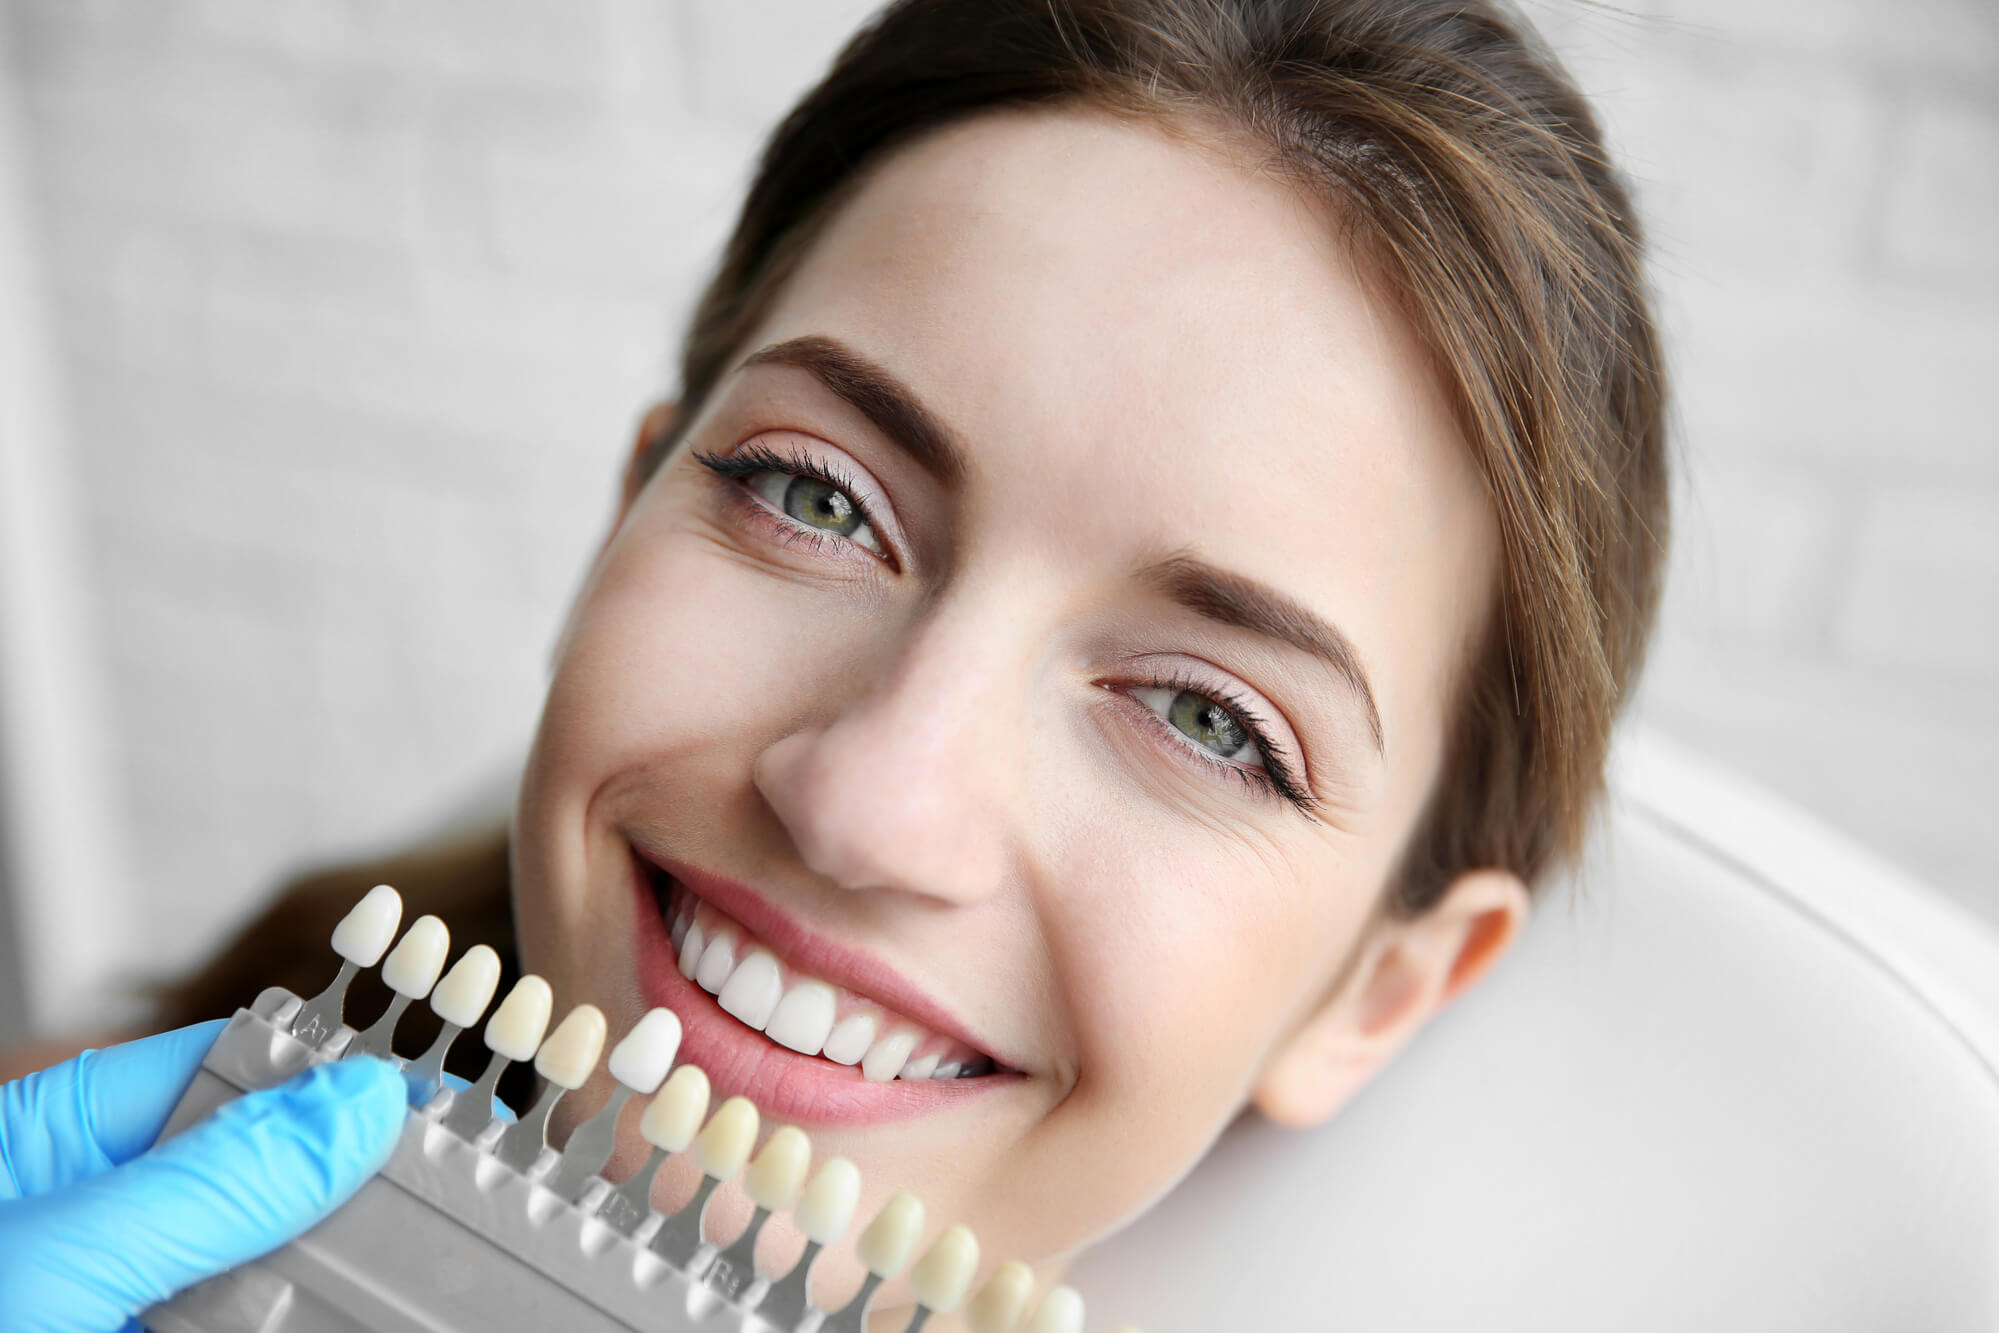 Can Cosmetic Dental Treatments Improve Your Oral Health?